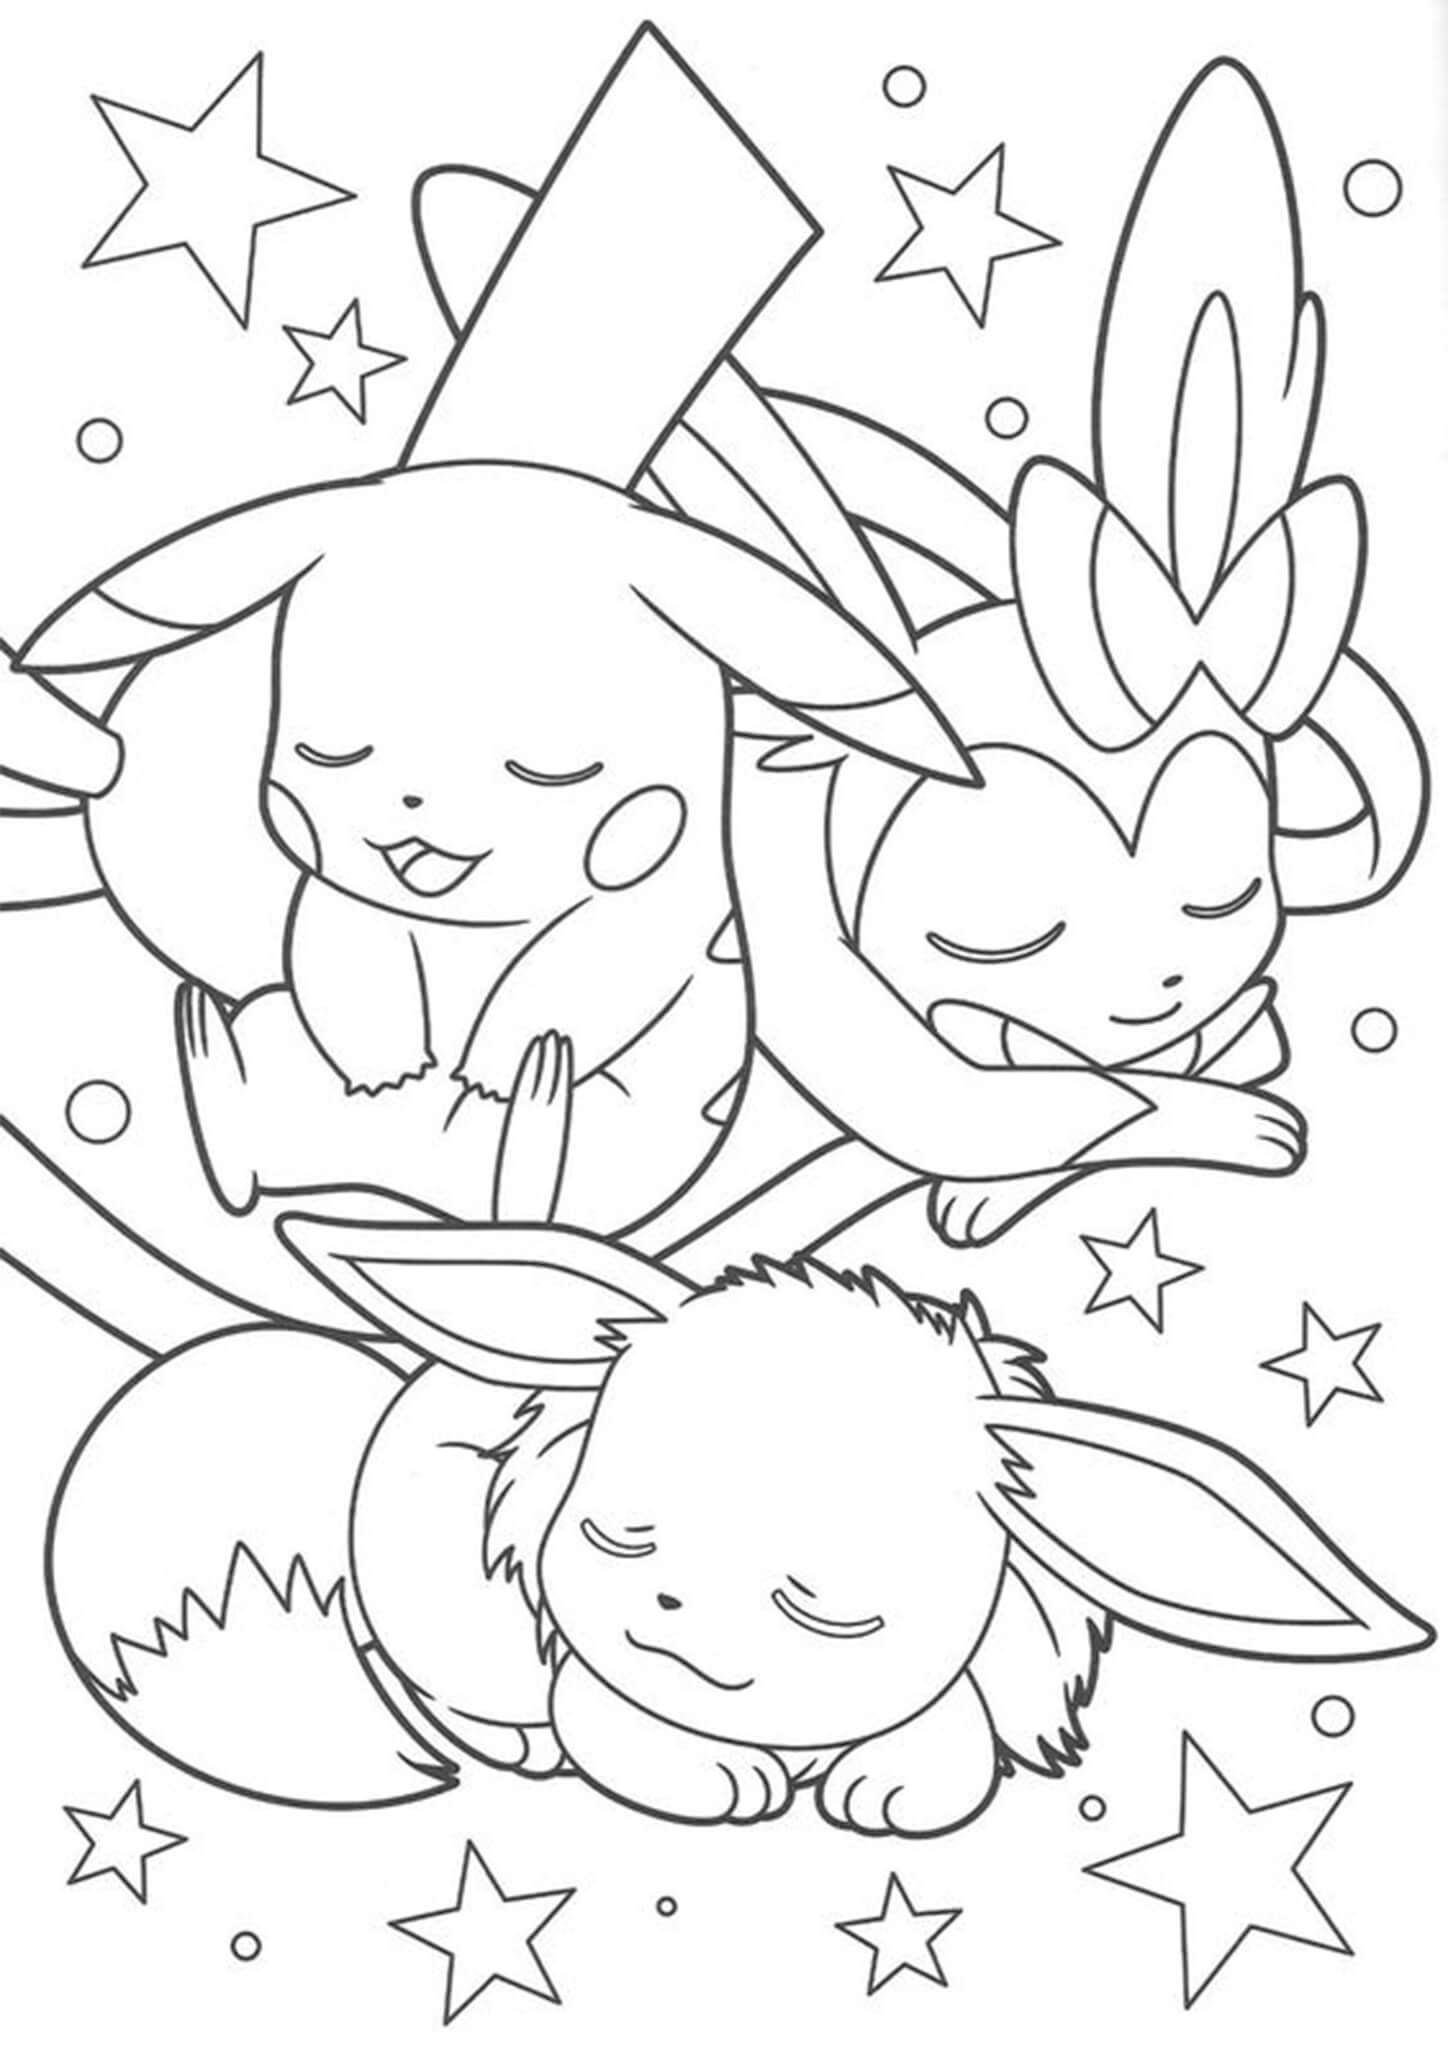 Free easy to print eevee coloring pages pokemon coloring sheets pokemon coloring pages pikachu coloring page